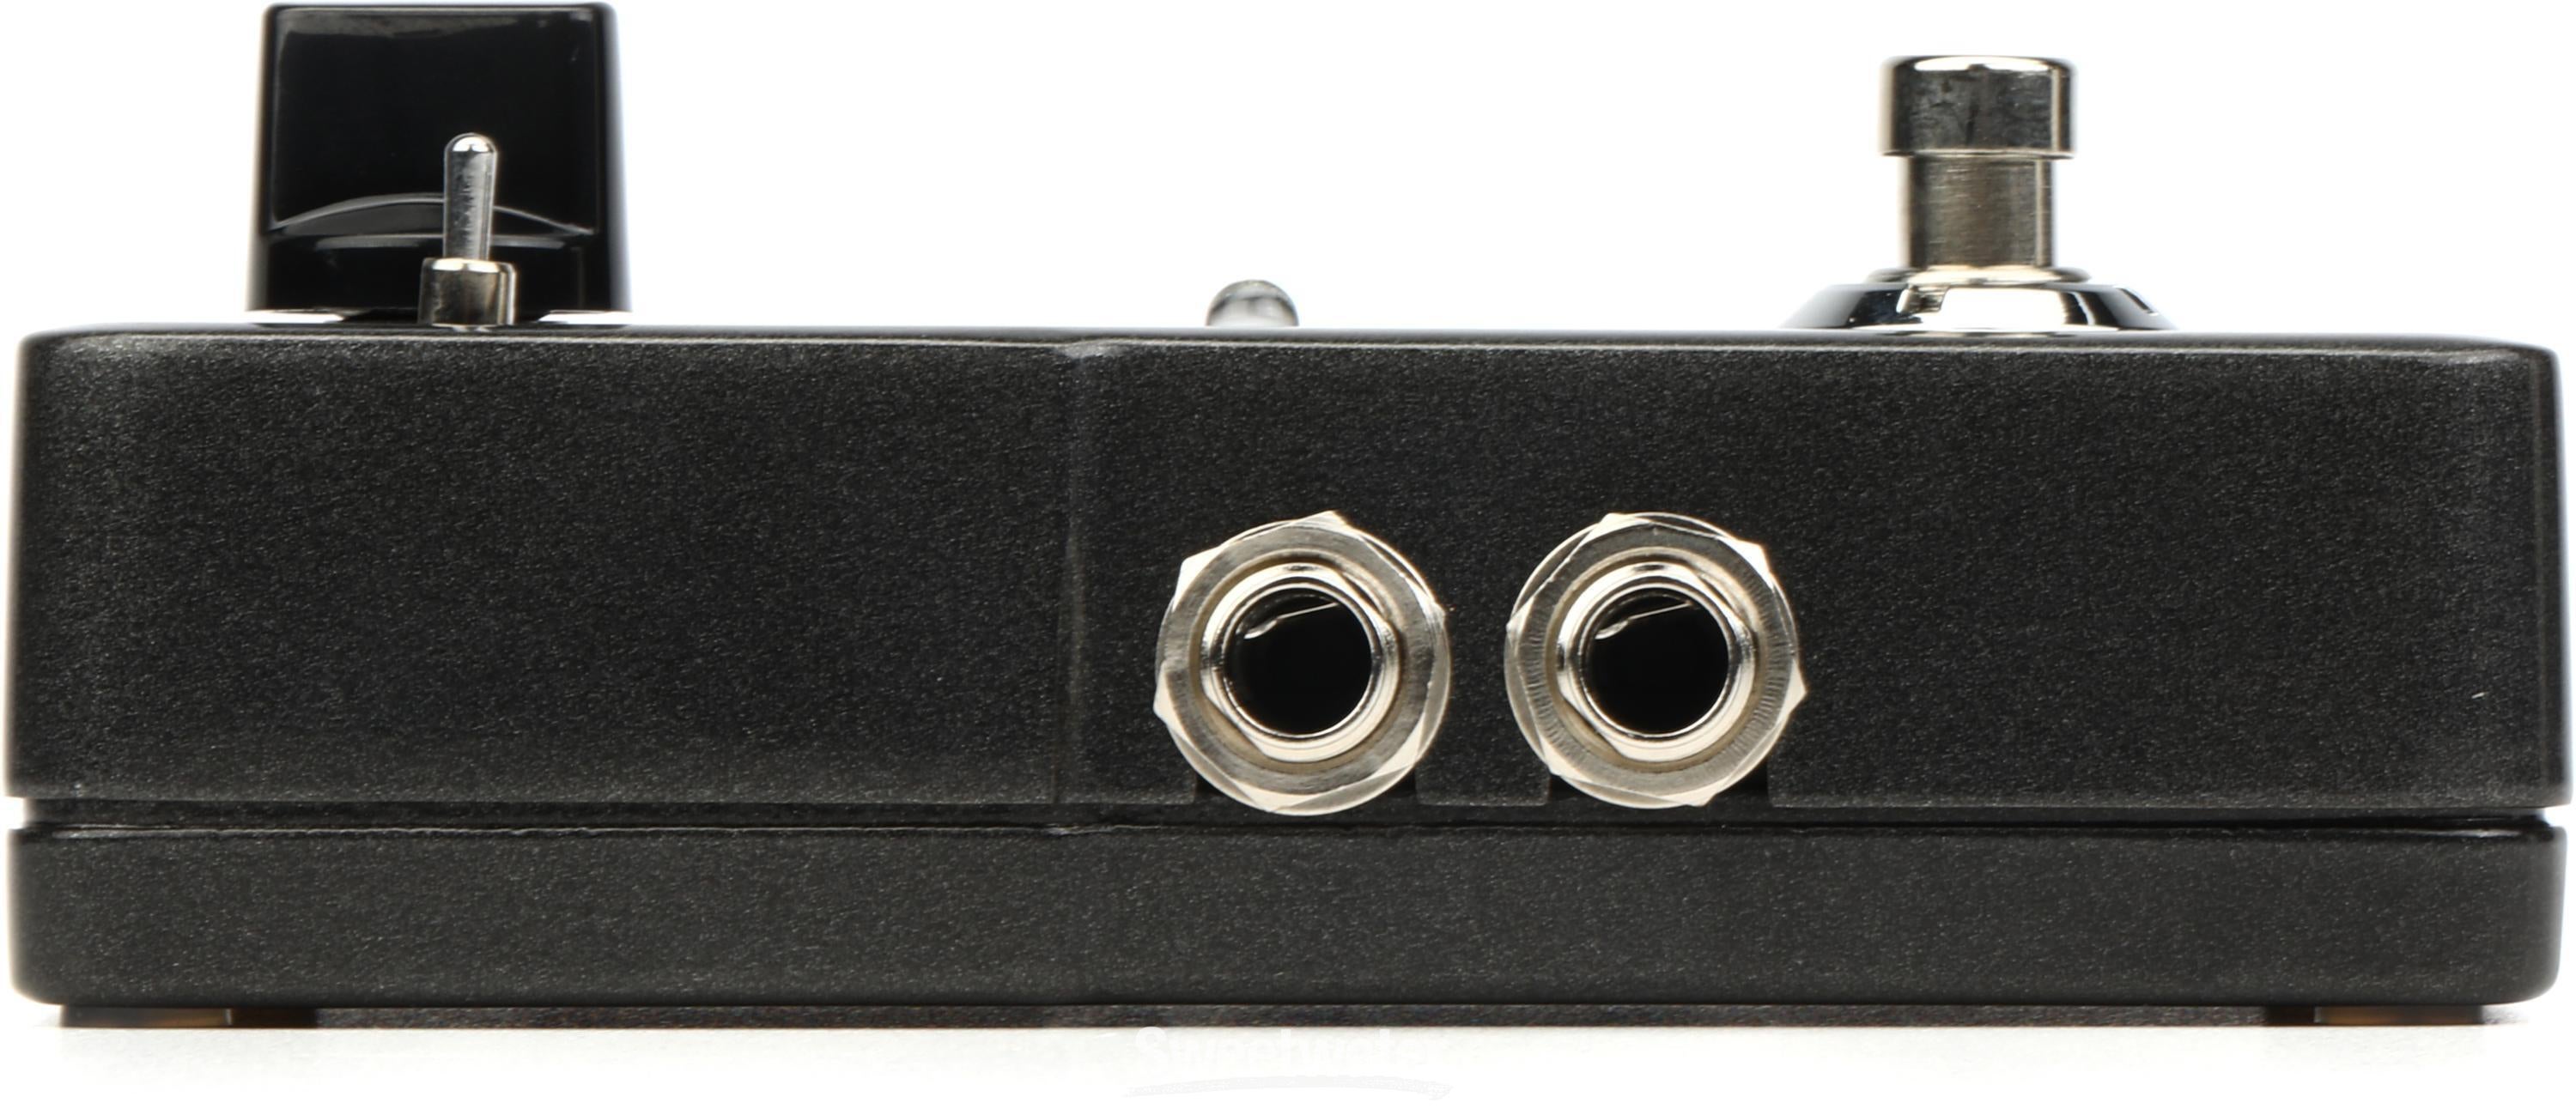 TC Electronic Ditto Stereo Looper Pedal | Sweetwater